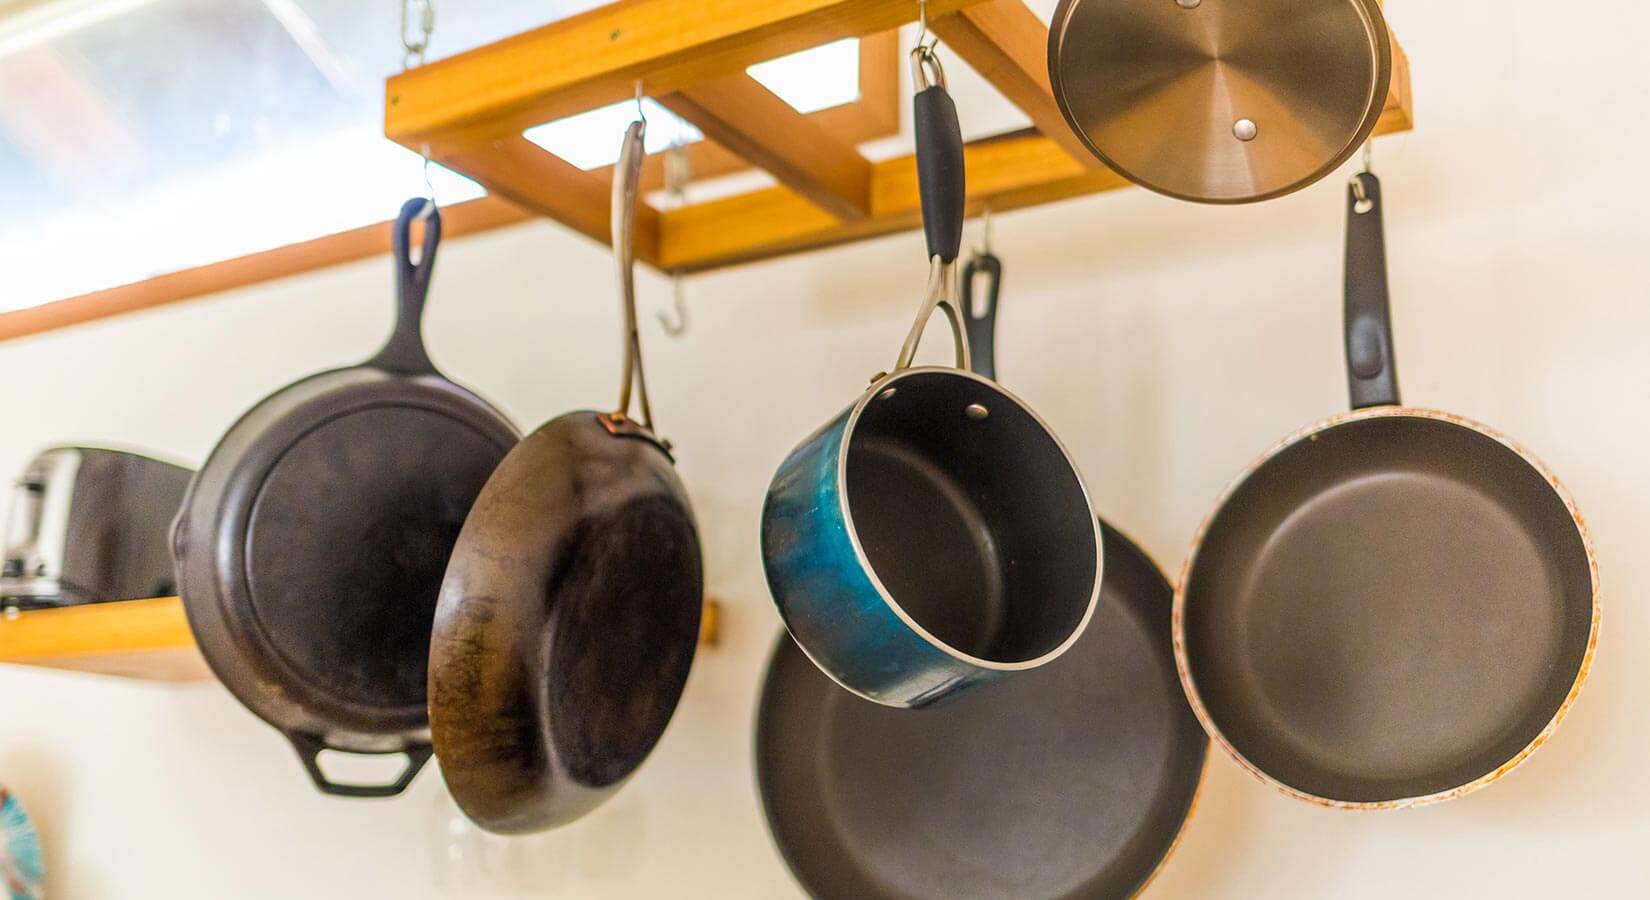 Six pots and pans hanging from wood ceiling rack.